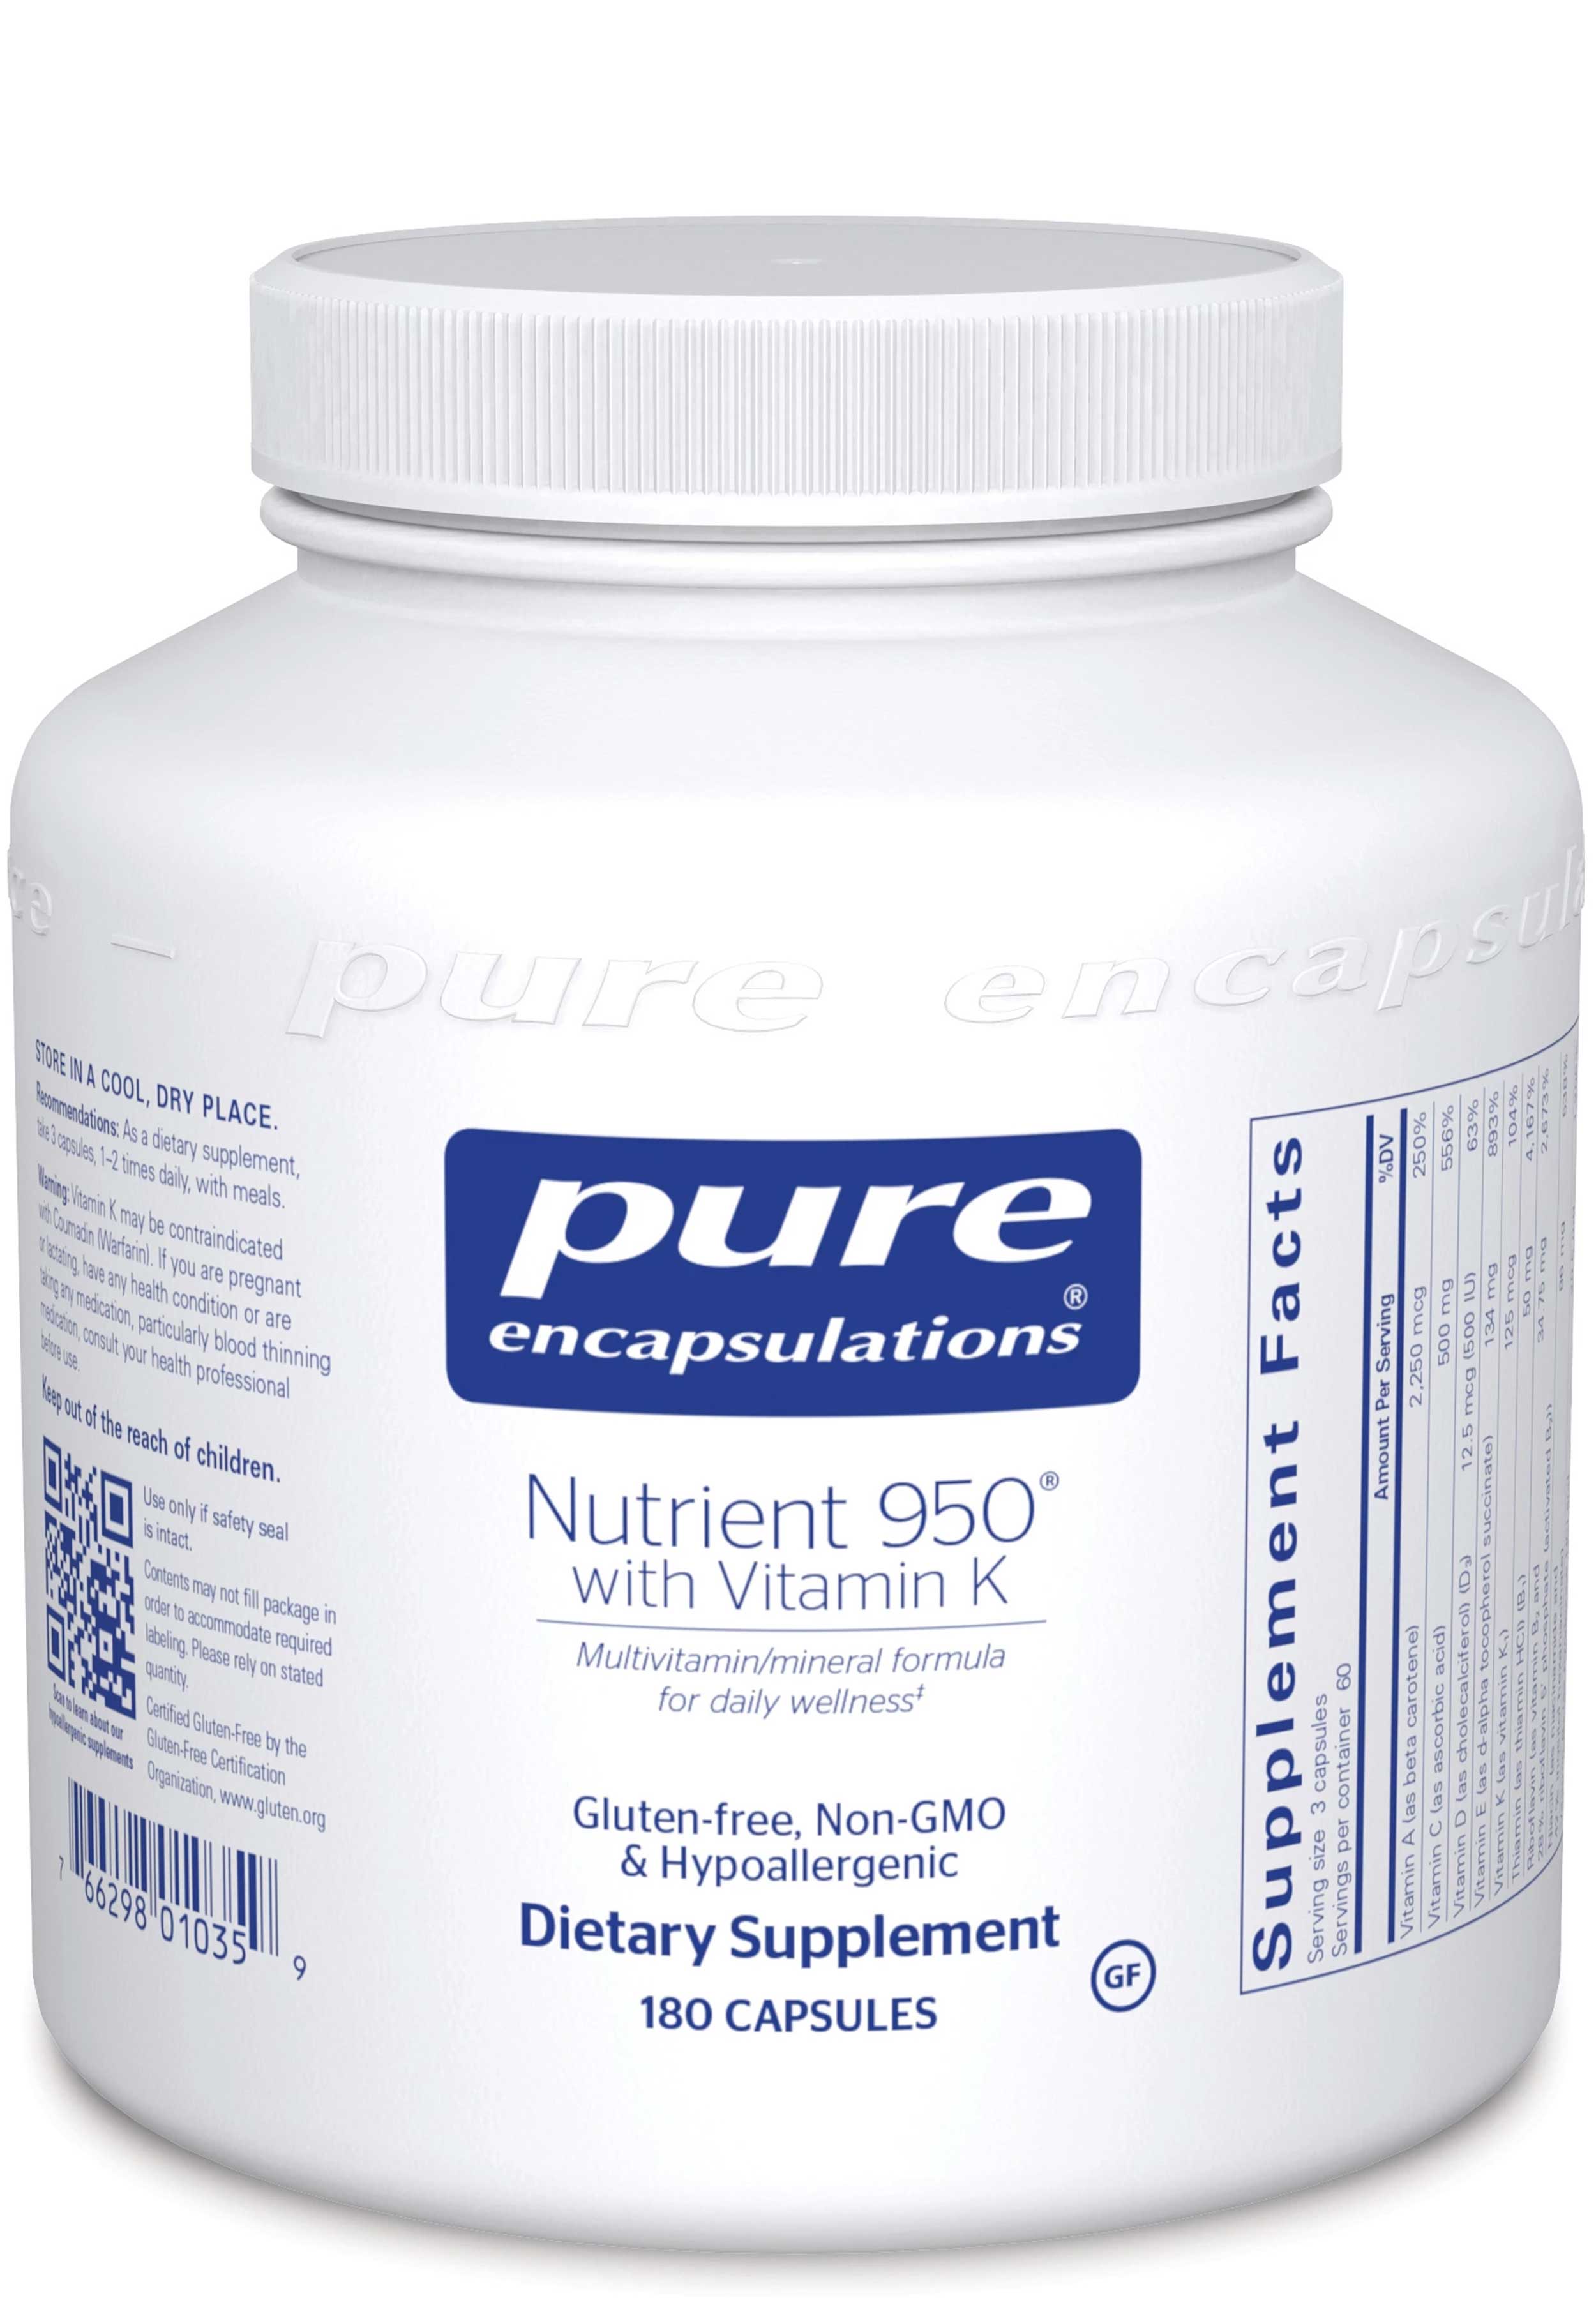 Pure Encapsulations Nutrient 950 with Vitamin K